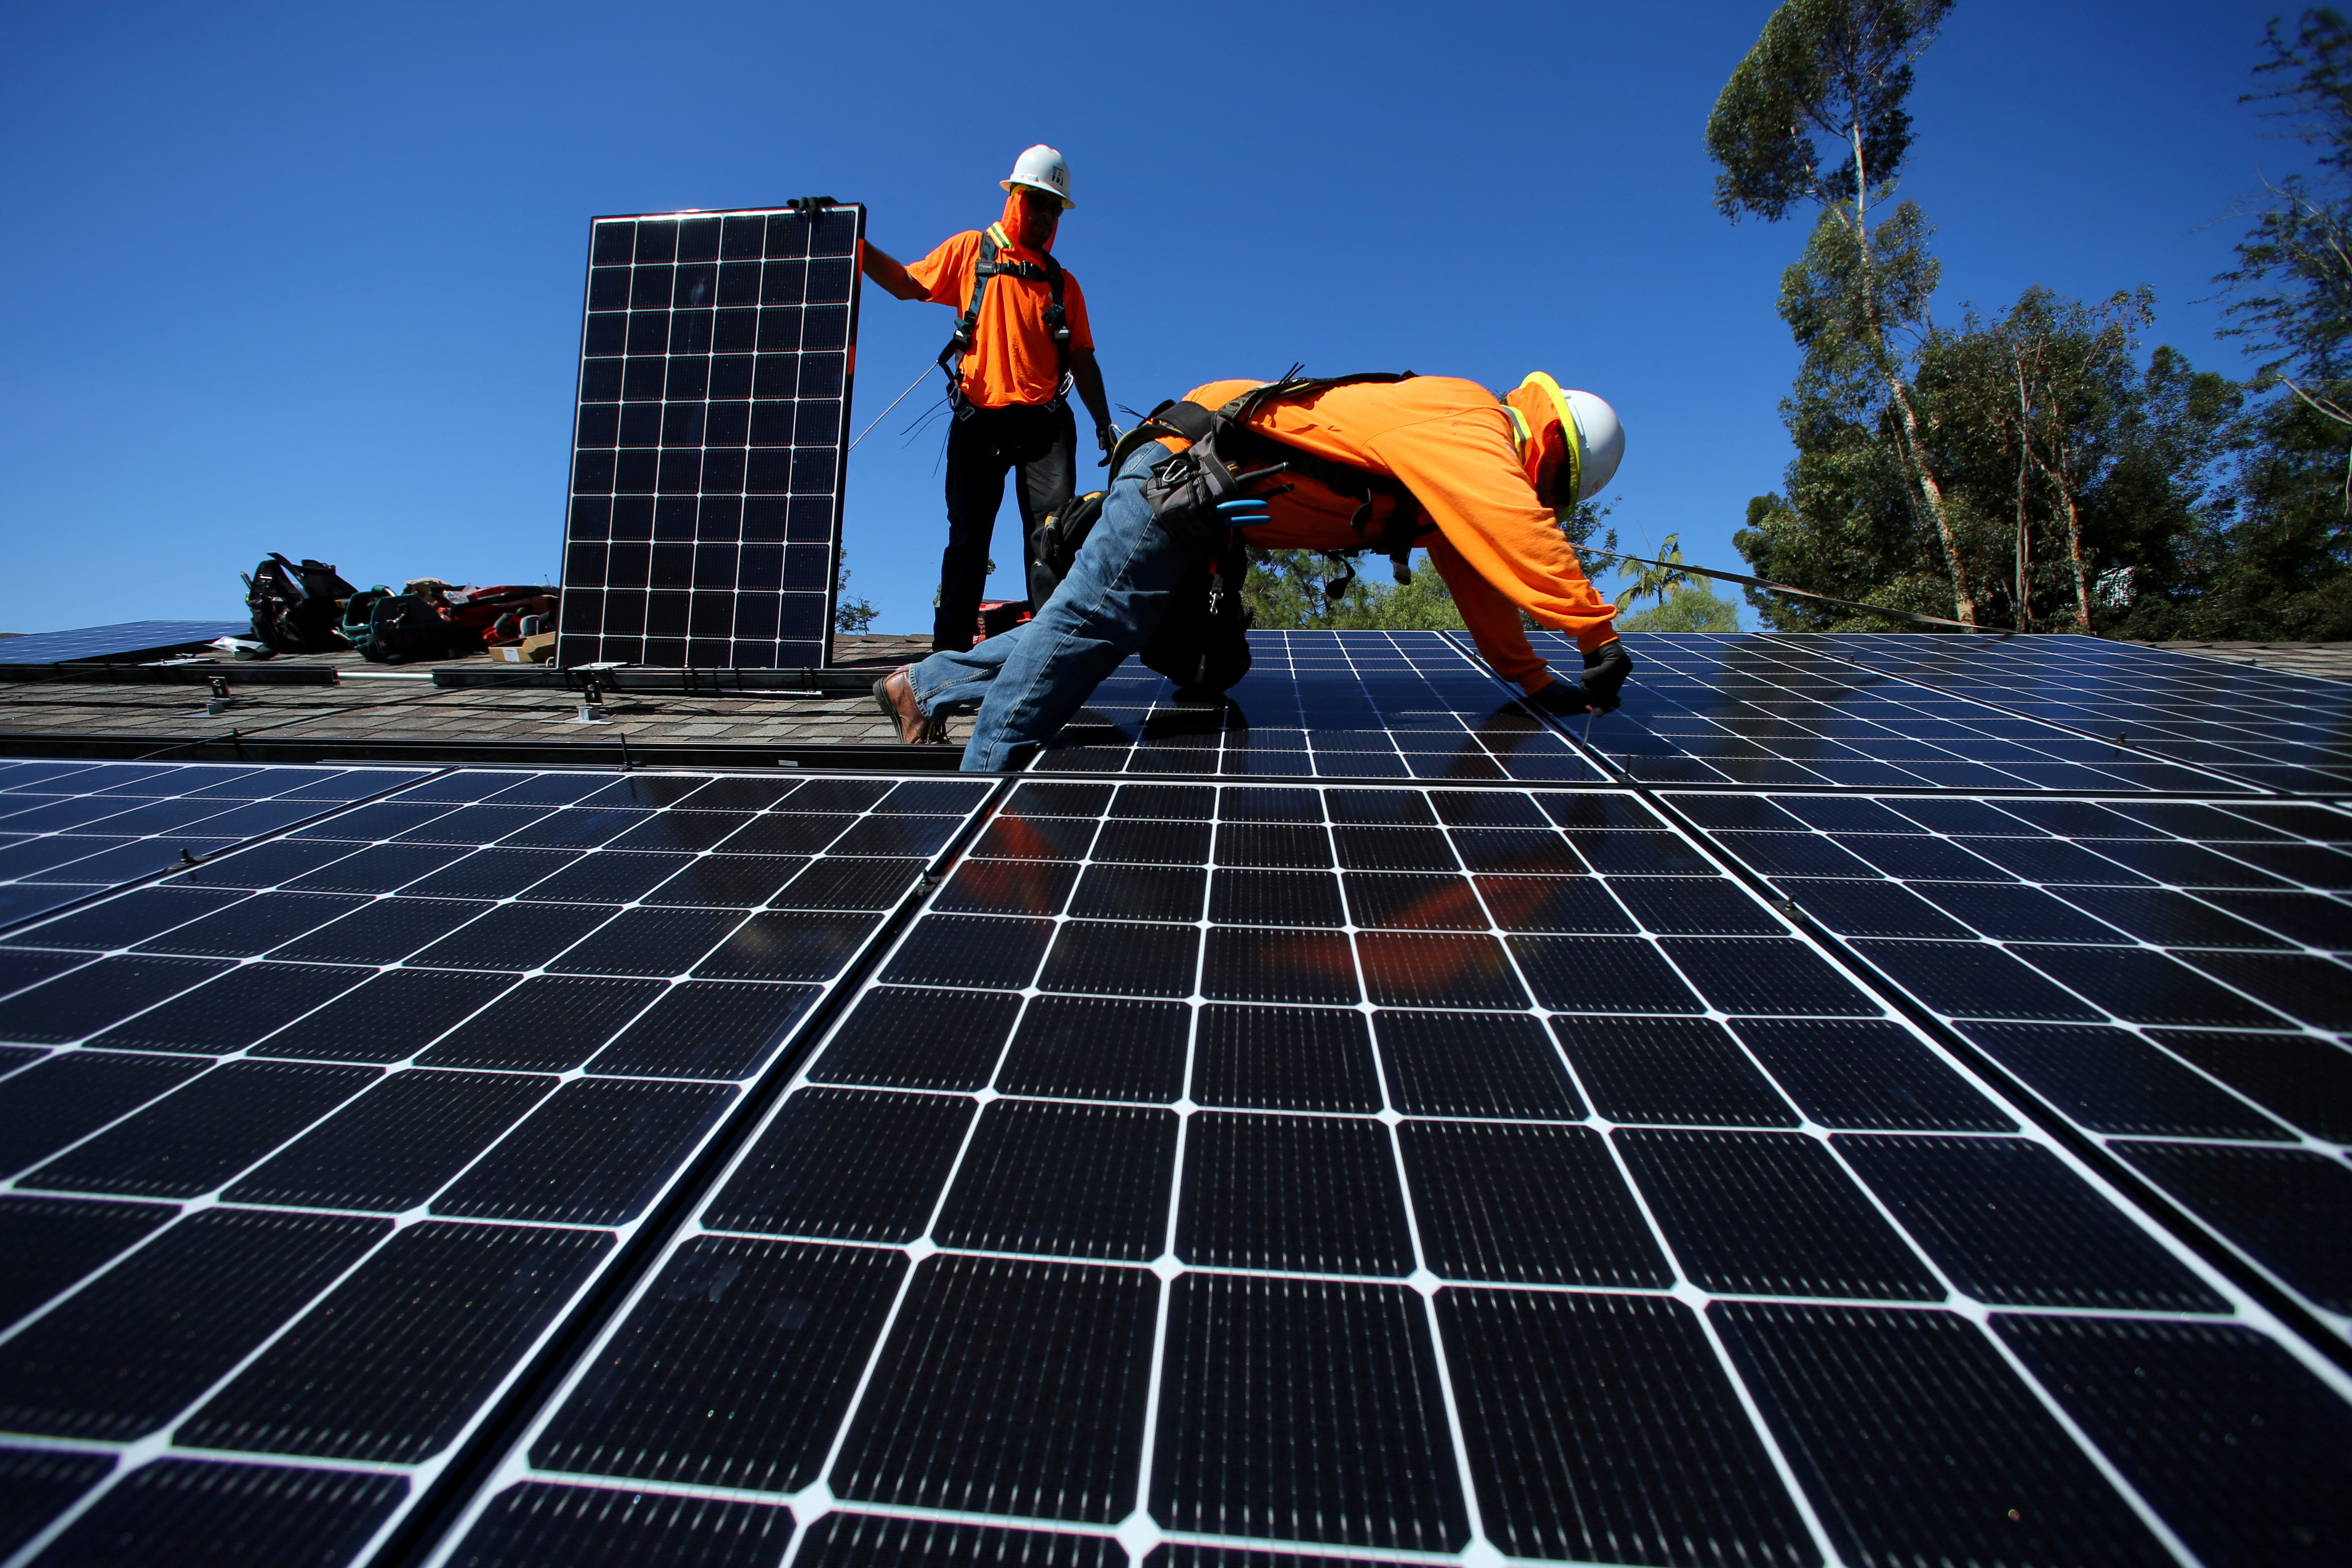 California reduces rooftop solar incentive it says favored the rich